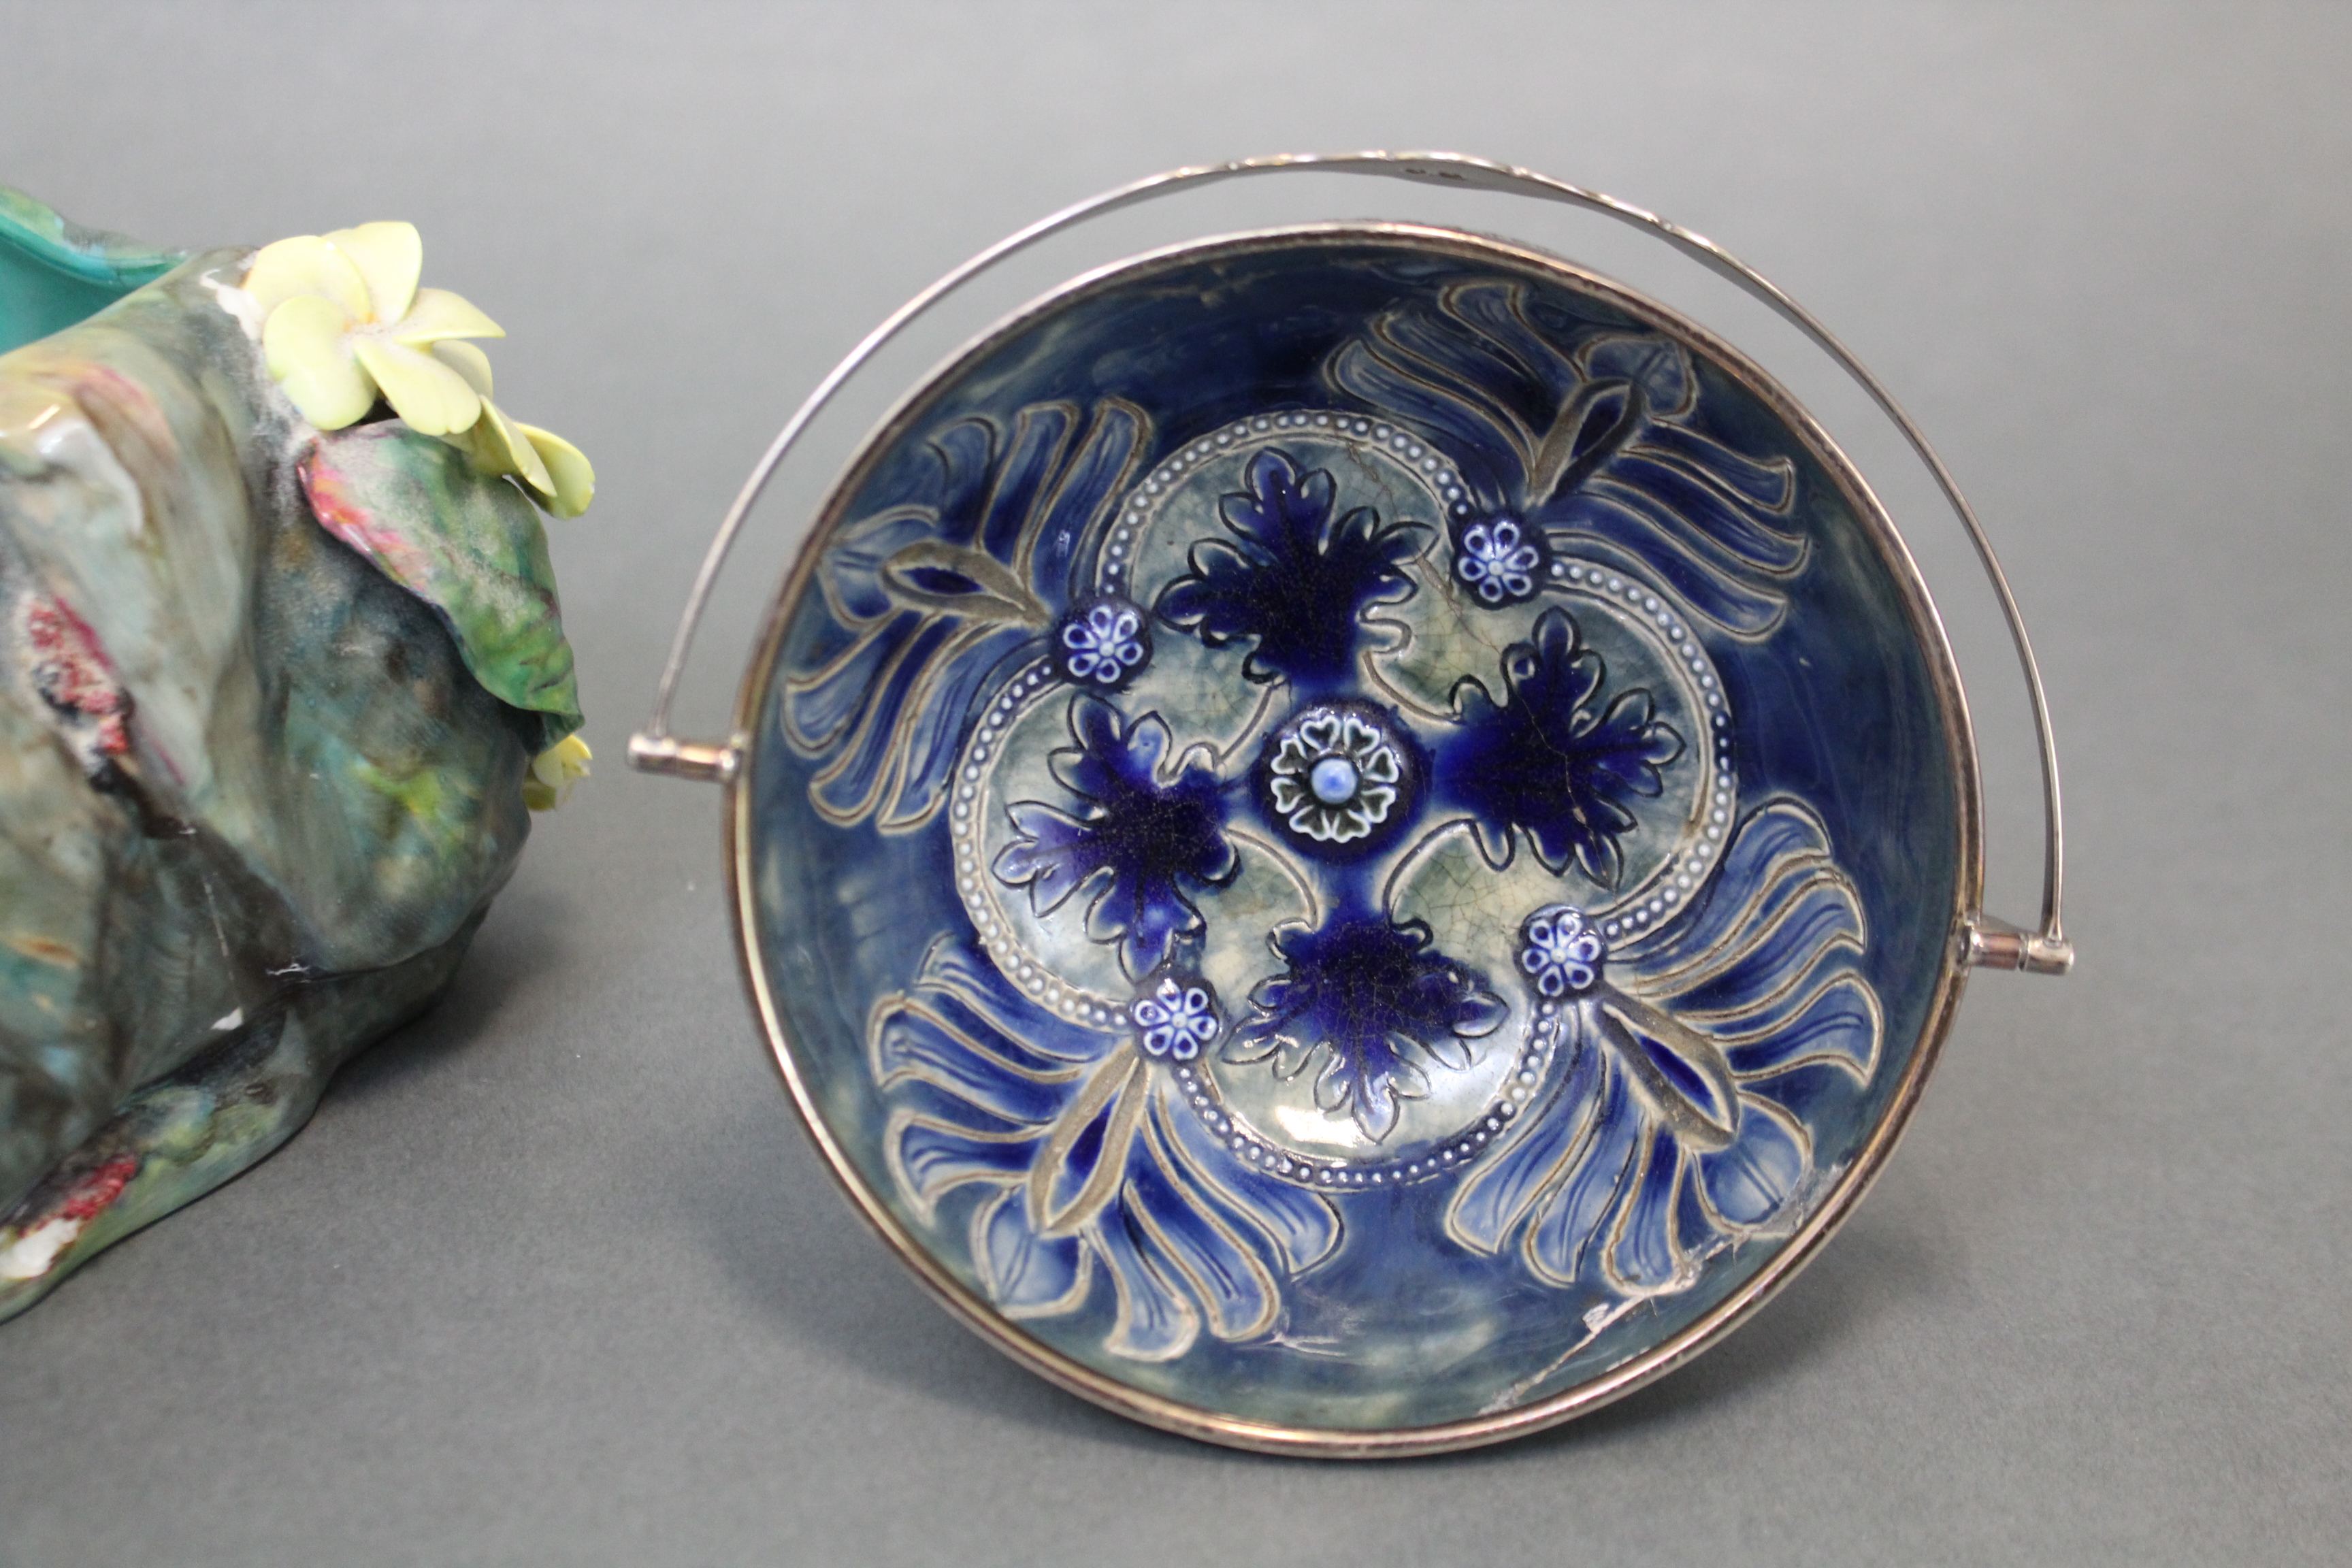 A Royal Doulton Lambeth stoneware bowl by Elizabeth Fisher, with applied decoration in blue & - Image 5 of 6